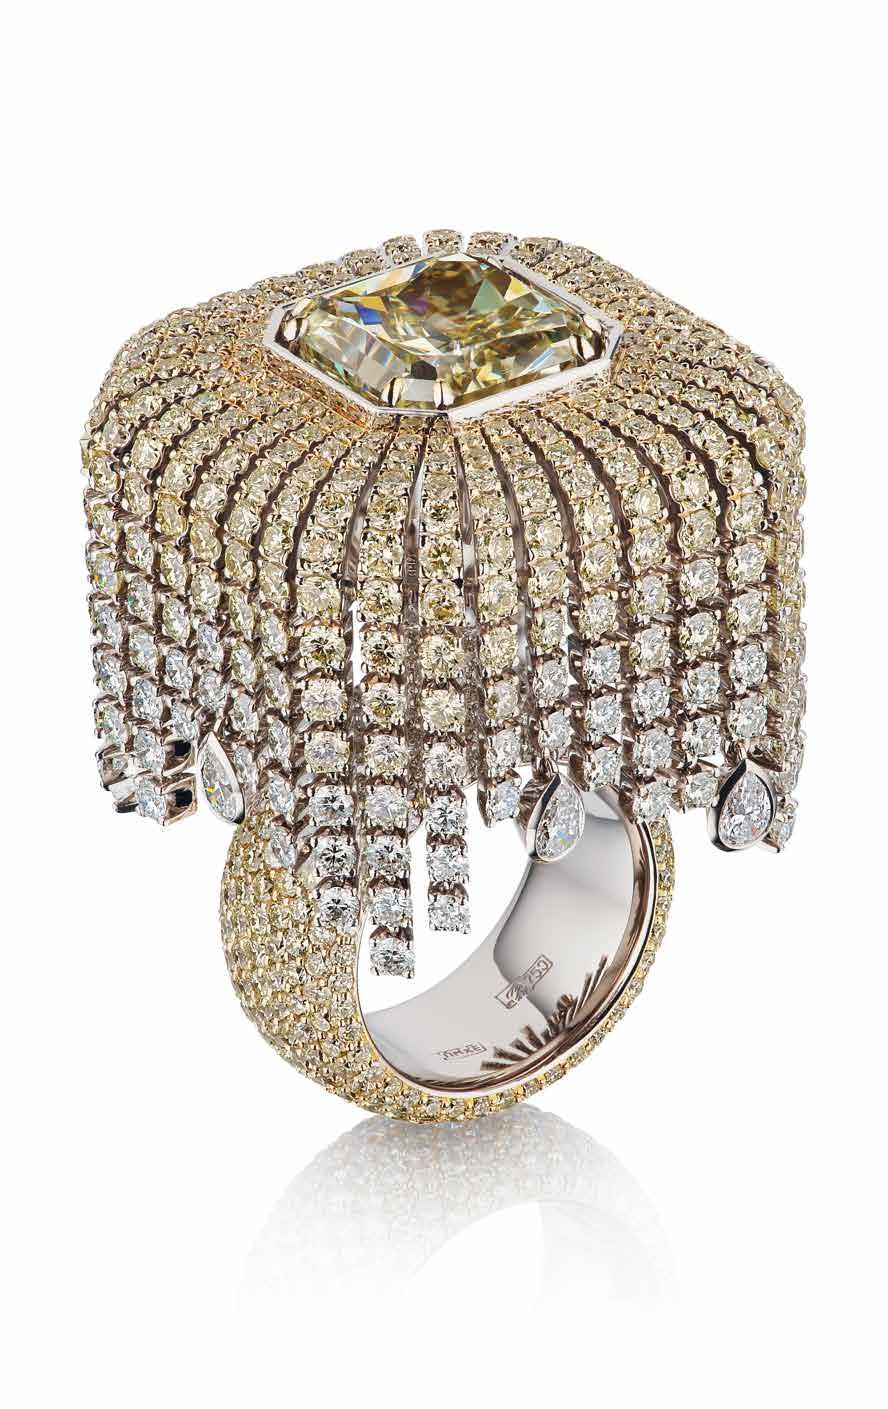 The effect is compounded by the fact that the diamonds are also delicately colour graded in tones of light yellows and whites; in addition, the fringes of diamonds have